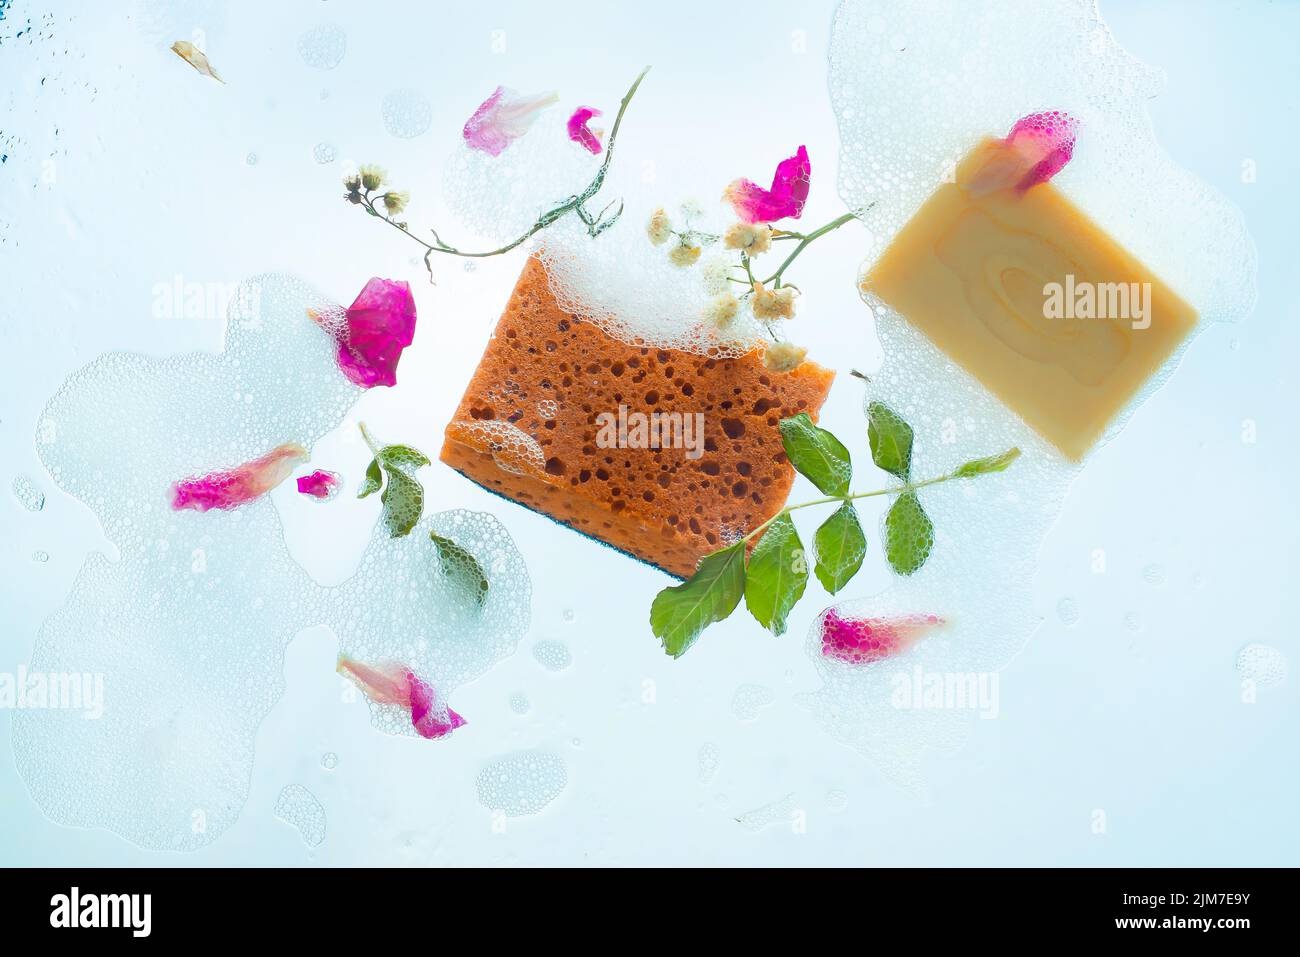 Soap and sponges in foam, delicate dishwashing, floral decor, backlight Stock Photo